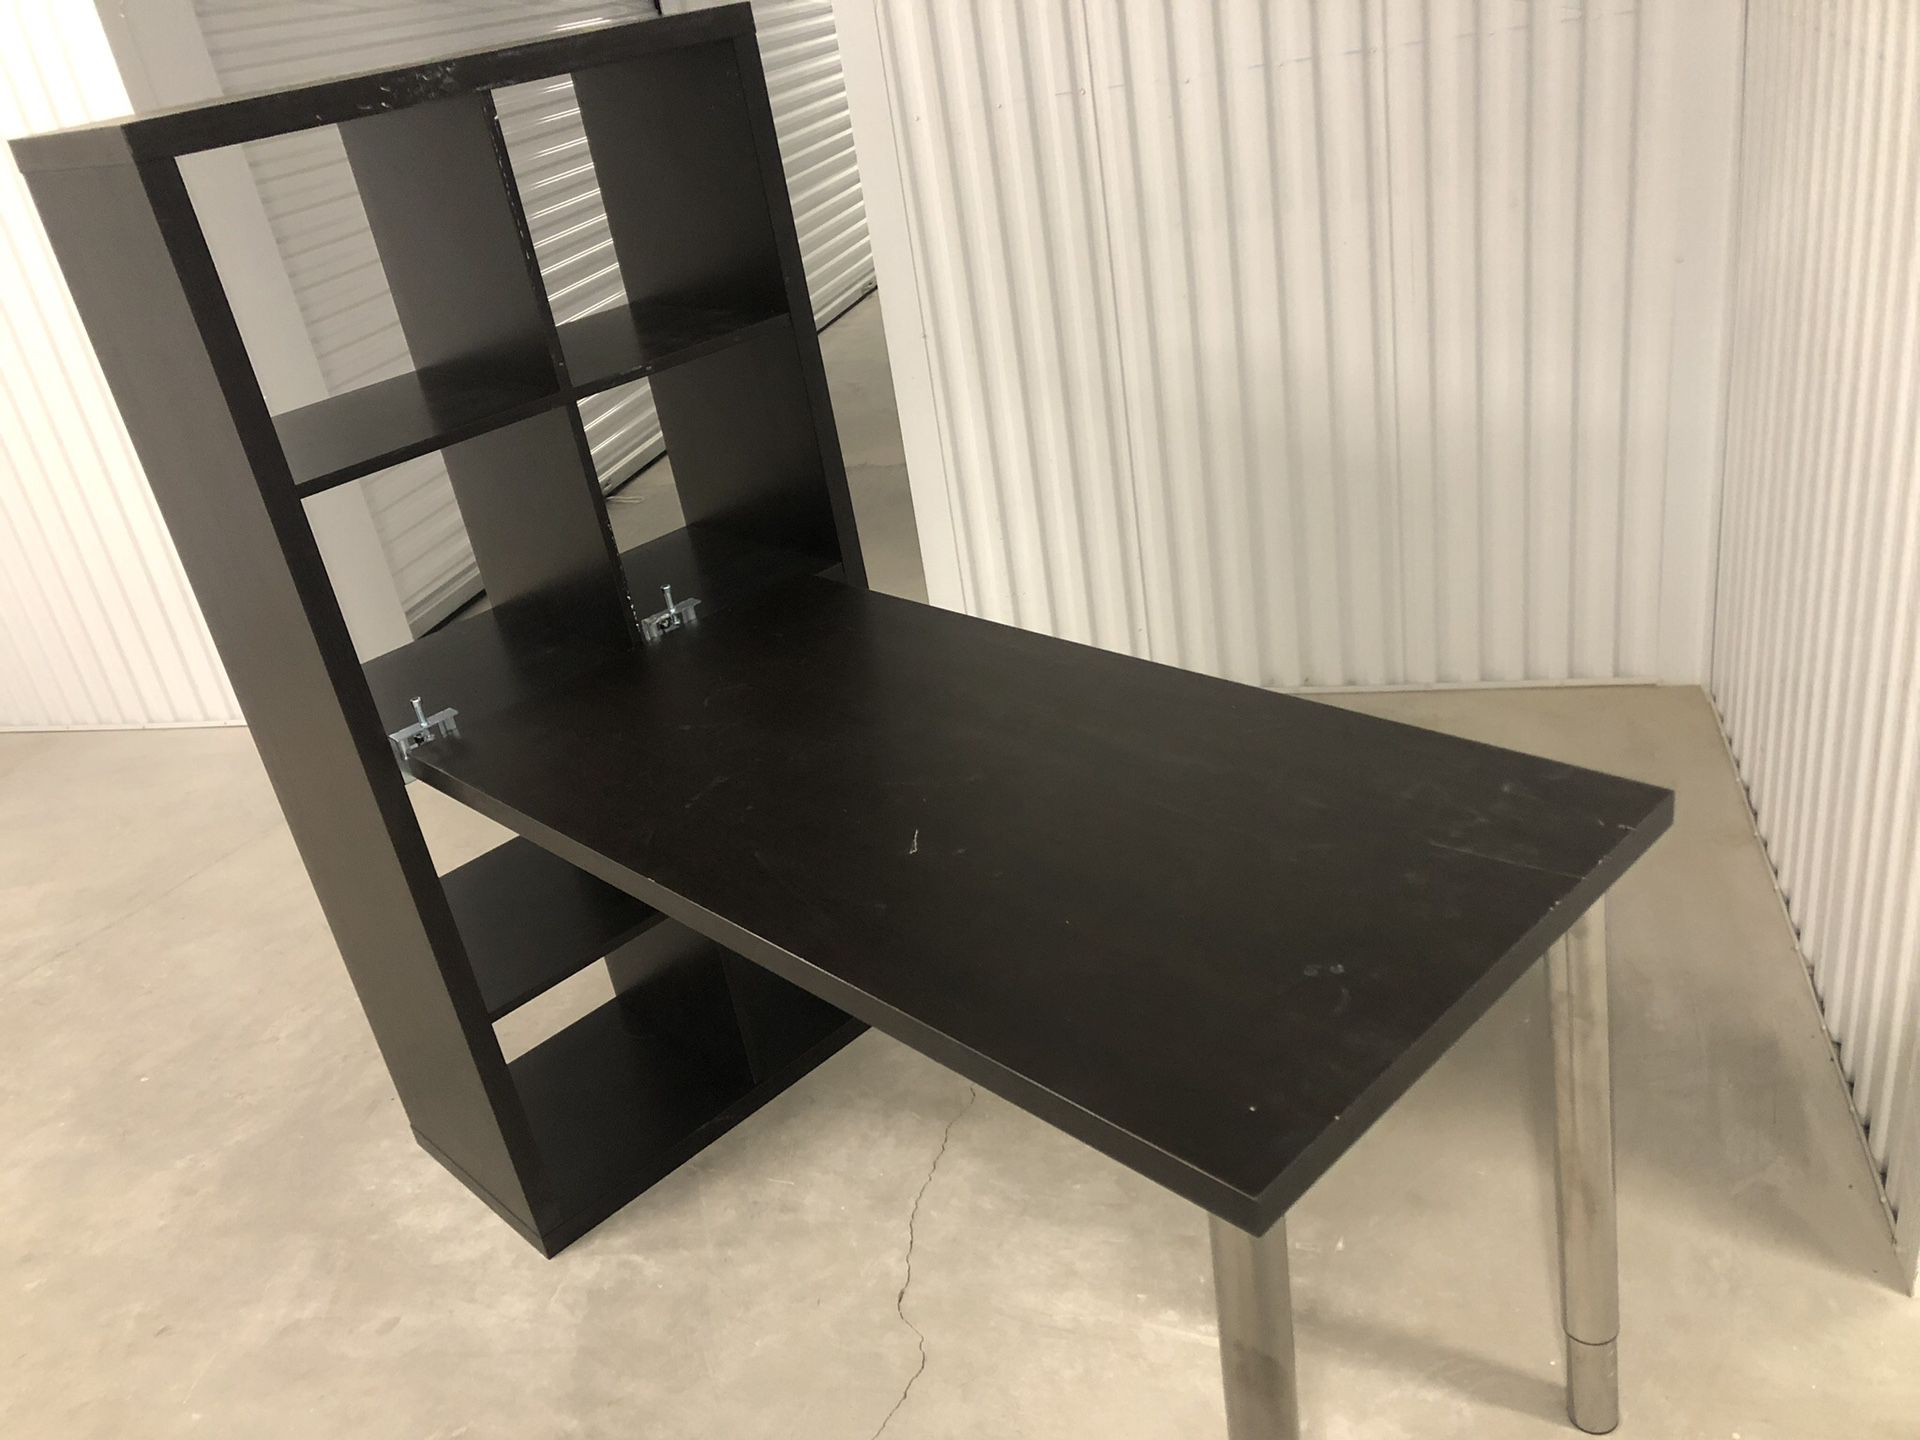 Modern desk with cubicles/shelves